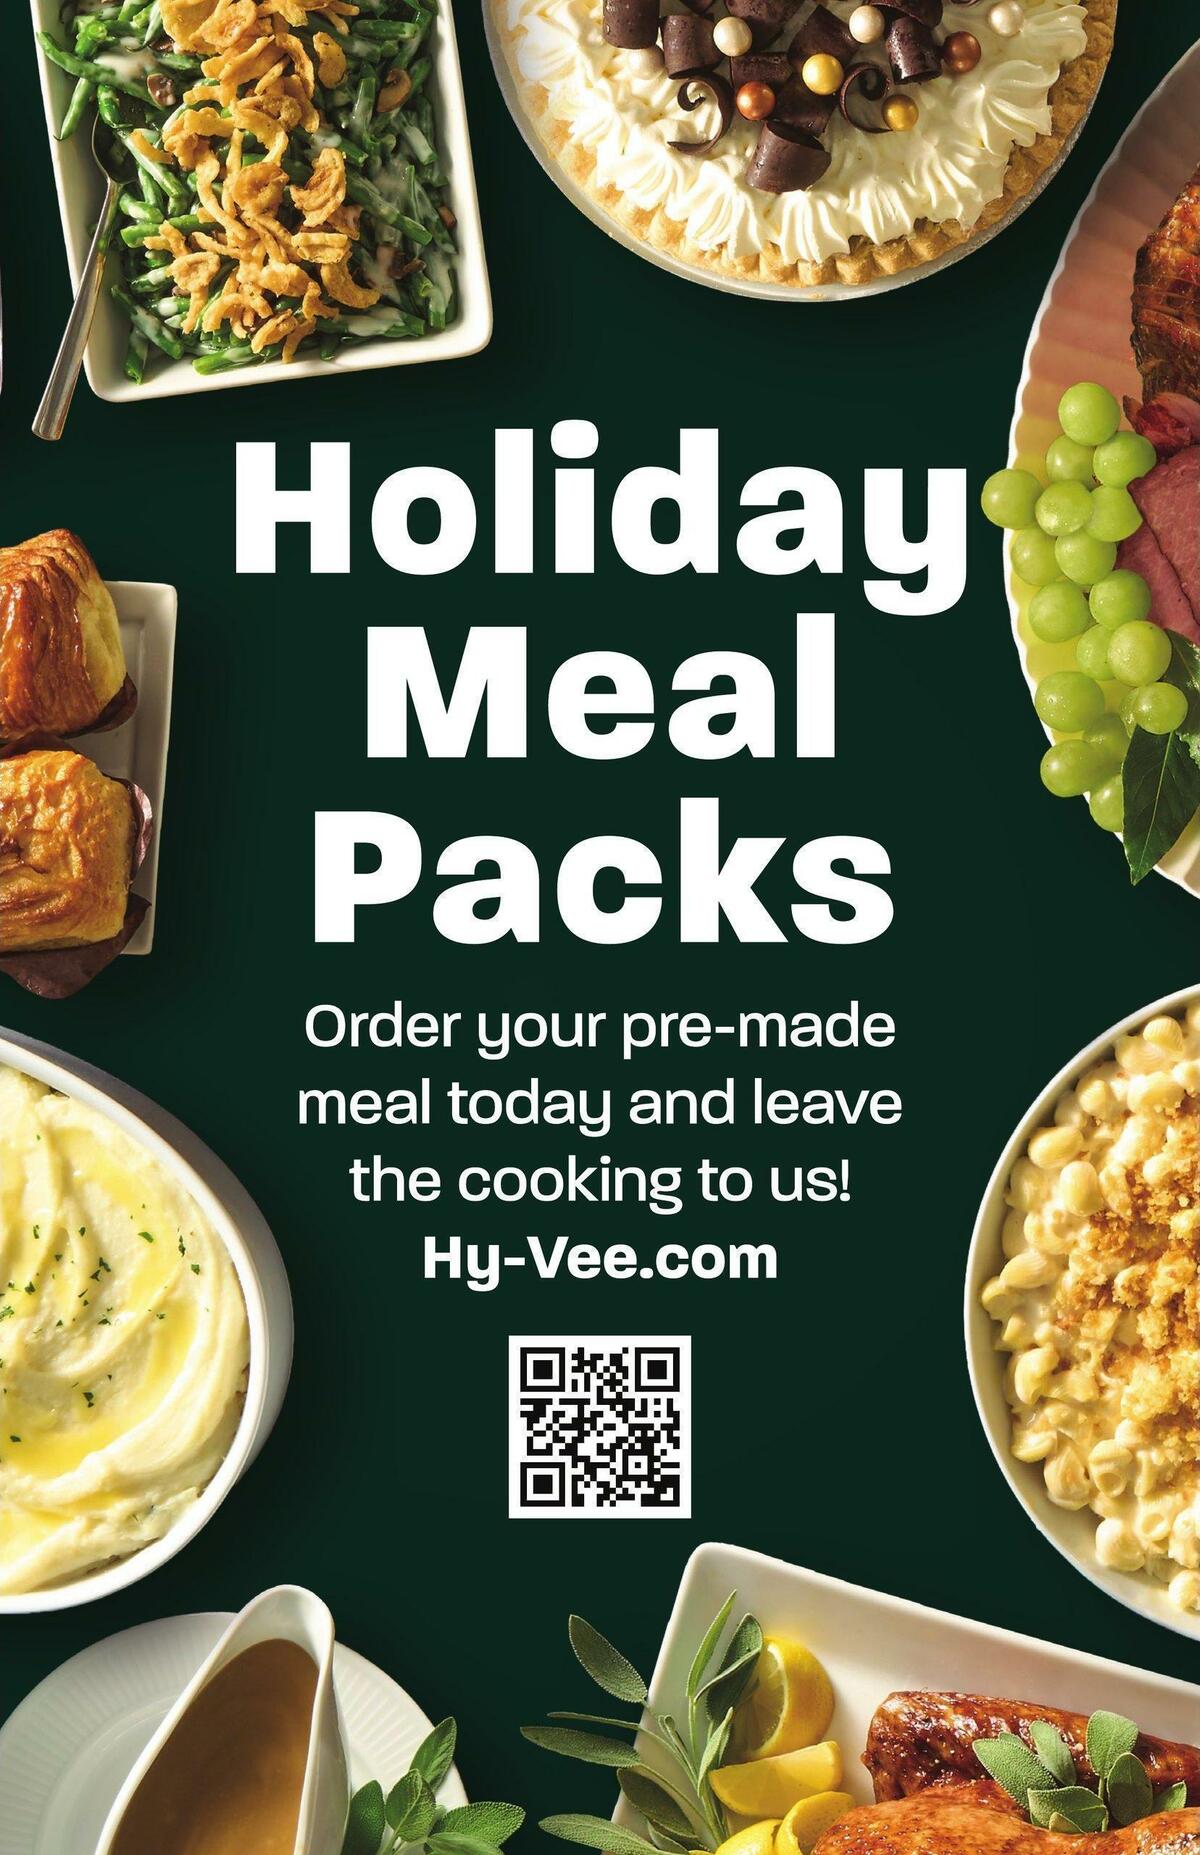 Hy-Vee 4 Days Only Weekly Ad from November 14